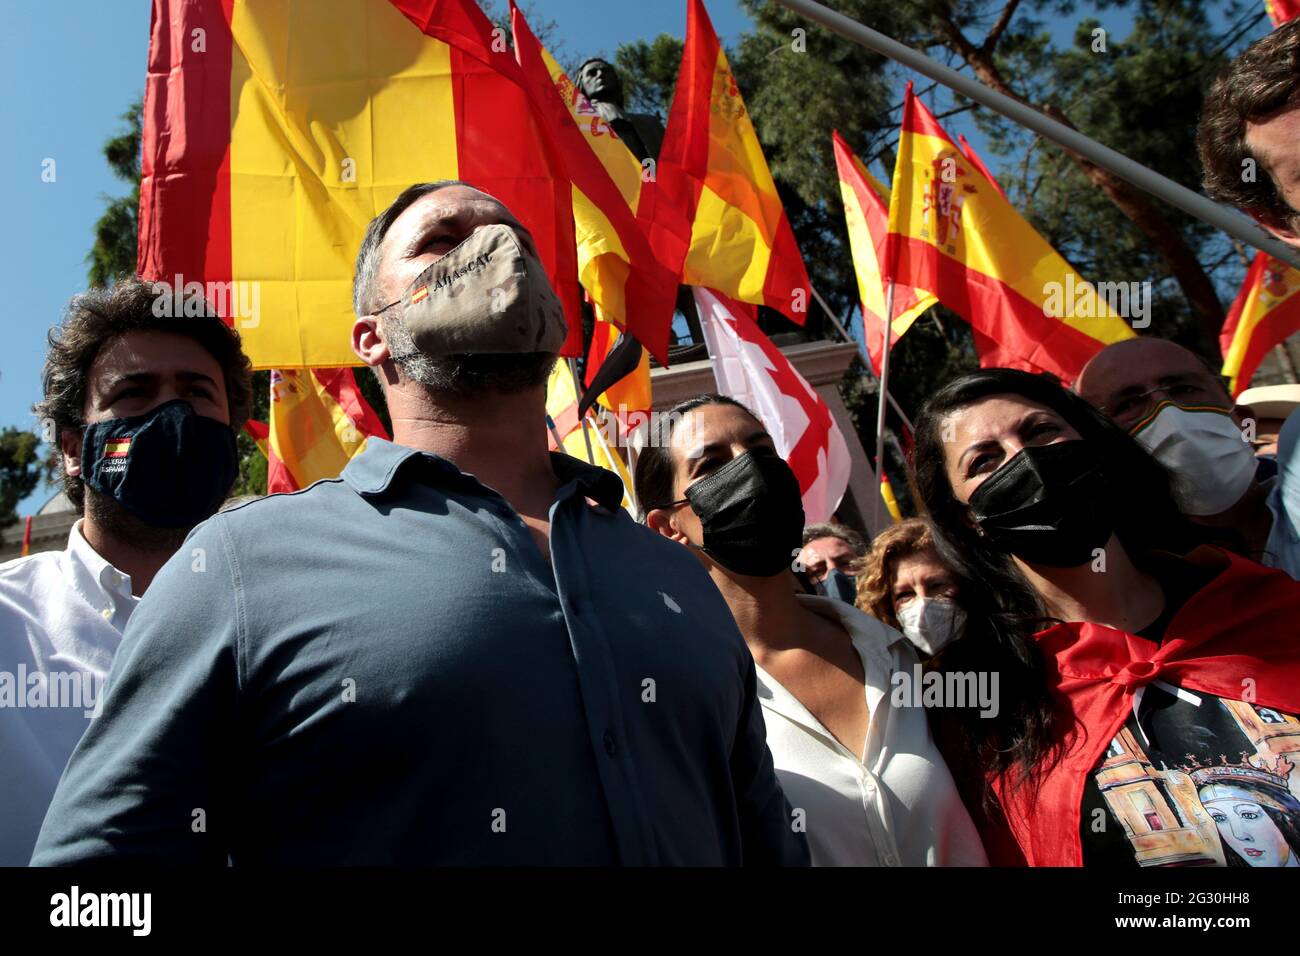 Madrid, Spain; 13.06.2021.- Santiago Abascal leader of Vox the politician with the greatest presence in the demonstration in the Plaza de Colon, at the monument to the Spanish admiral Blas de Lezo, who was one-eyed, lame and one-eyed. 'Unión 78' platform led by the Spanish politician Rosa Díez, the group that convened the meeting of the far-right in the Plaza de Colón in Madrid, to protest the possible pardons to the imprisoned Catalan independence politicians. Among thousands of people who filled the square and the adjacent streets with Spanish flags, the attendees shouted slogans such as 'Ma Stock Photo